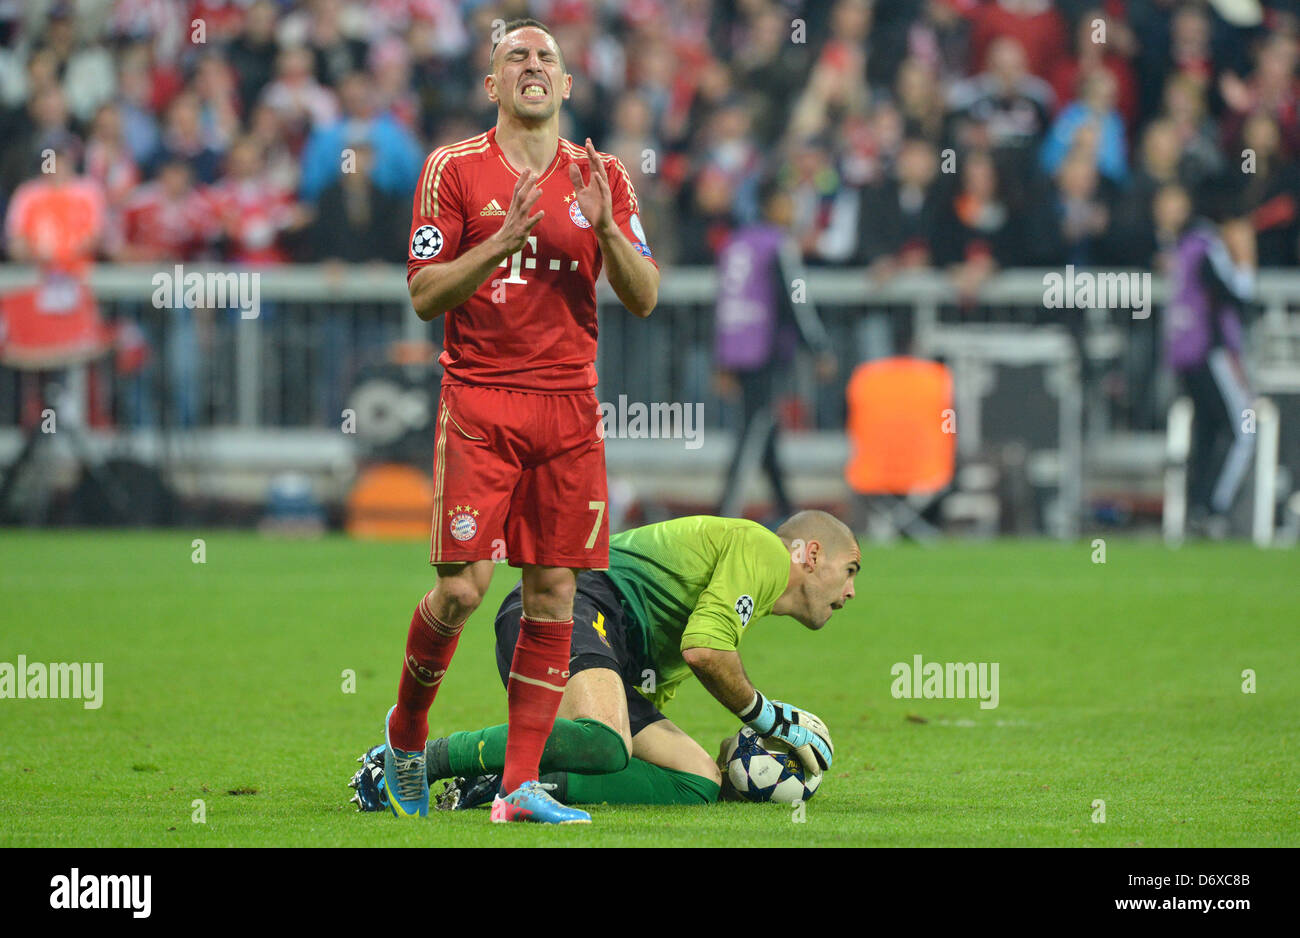 Munich's Franck Ribery (L) vies for the ball with Barcelona's goalkeeper Victor Valdes during the UEFA Champions League semi final first leg soccer match between FC Bayern Munich and FC Barcelona at Fußball Arena Muenchen in Munich, Germany, 23 April 2013. Photo: Peter Kneffel/dpa Stock Photo